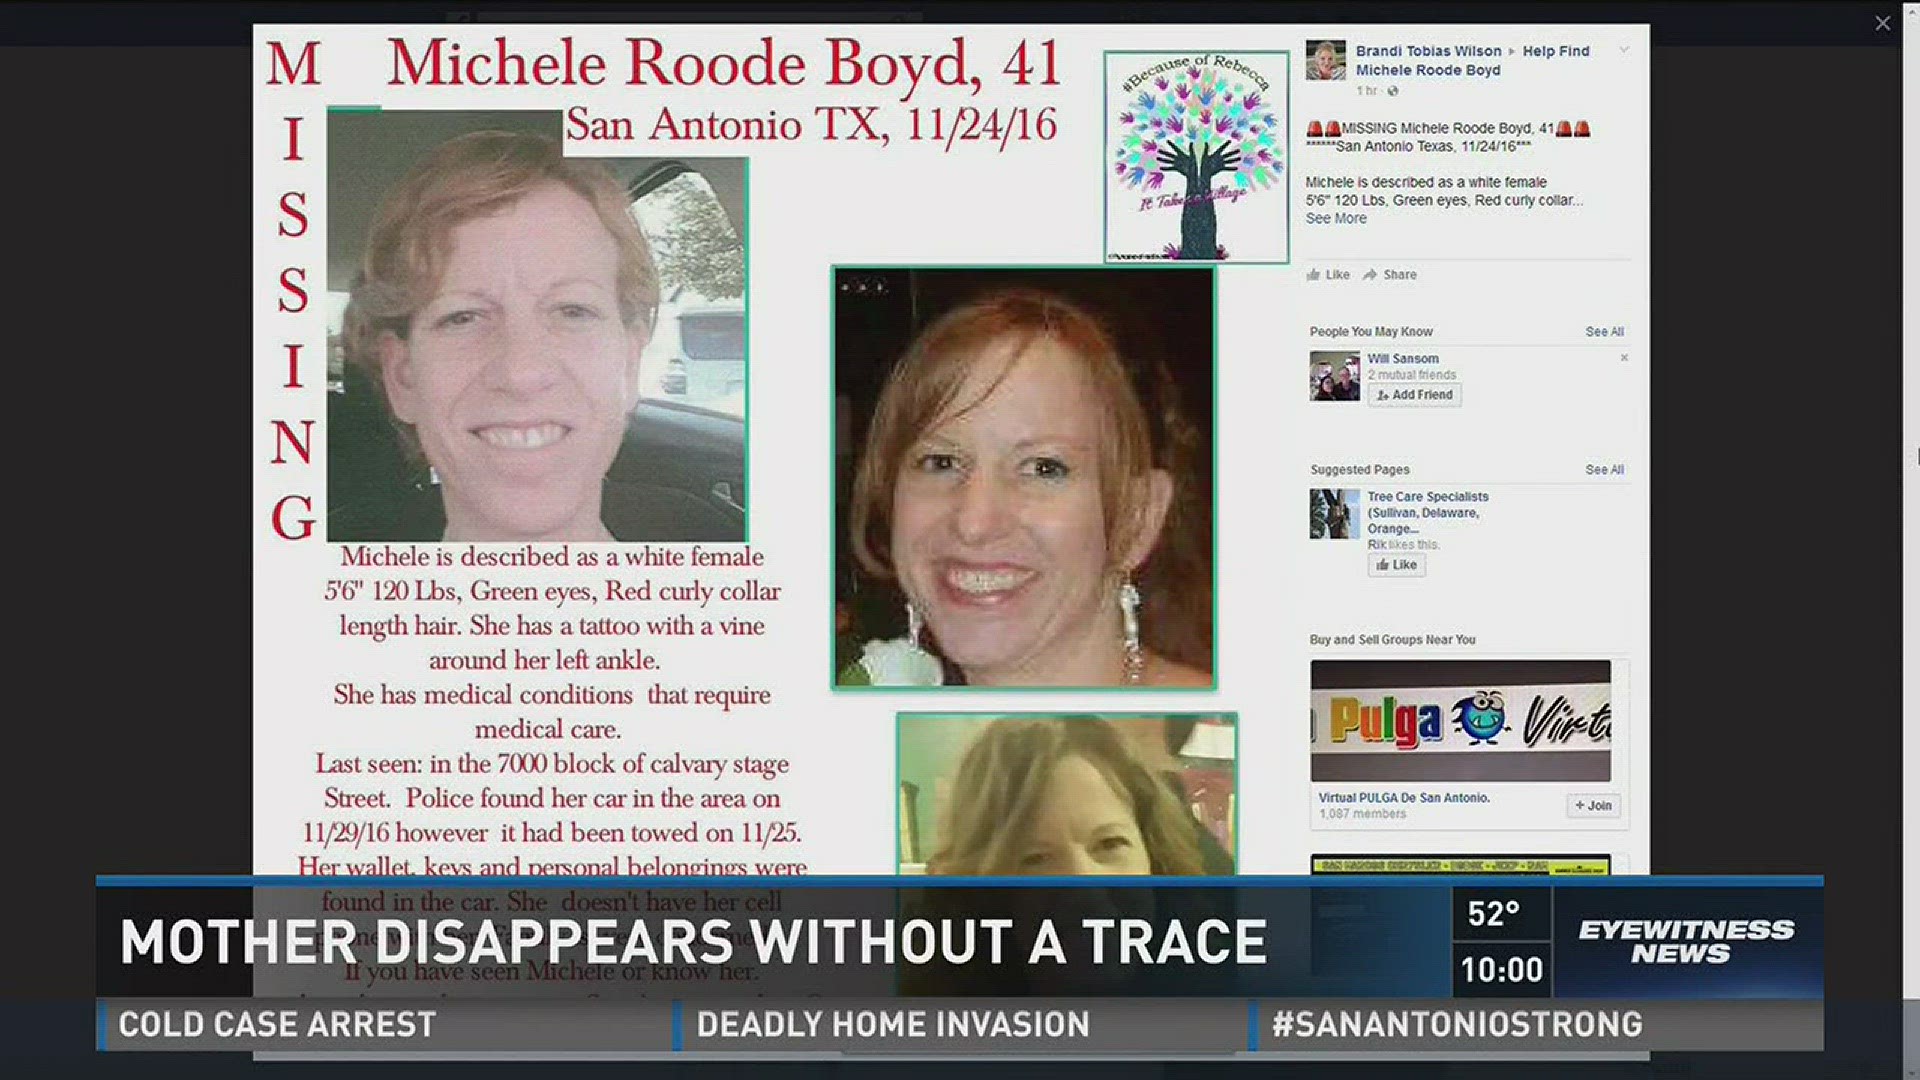 Mother disappears without a trace